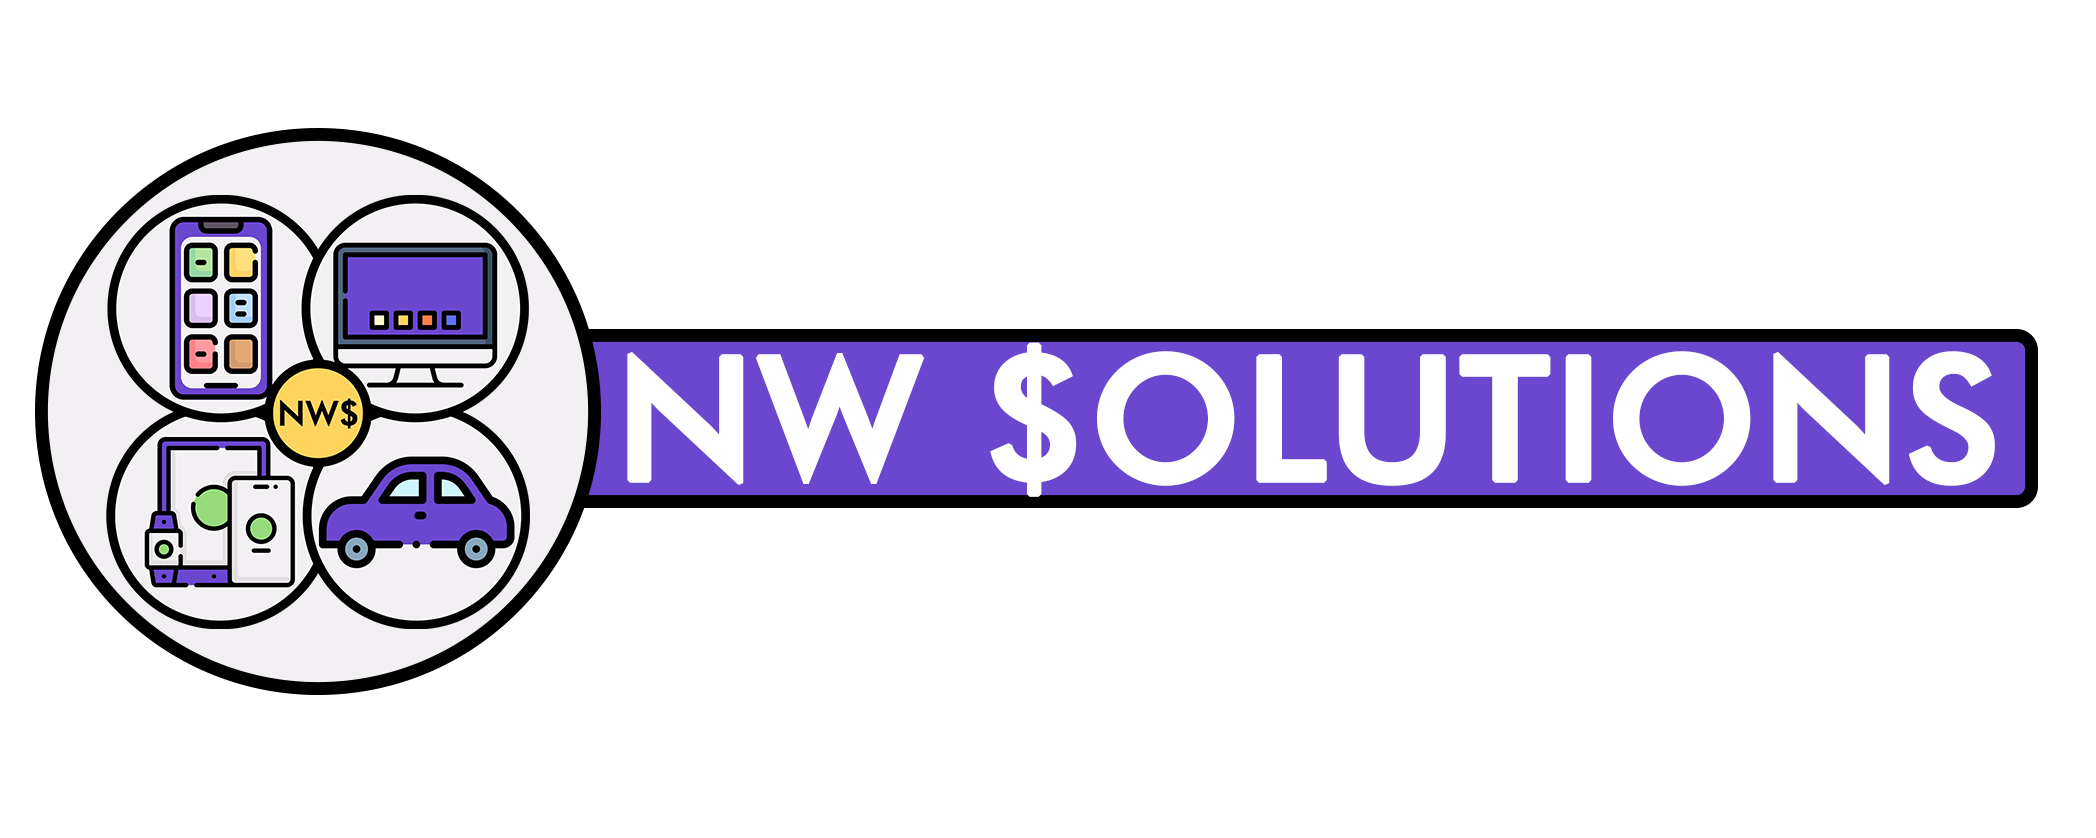 Not Working Solutions Logo